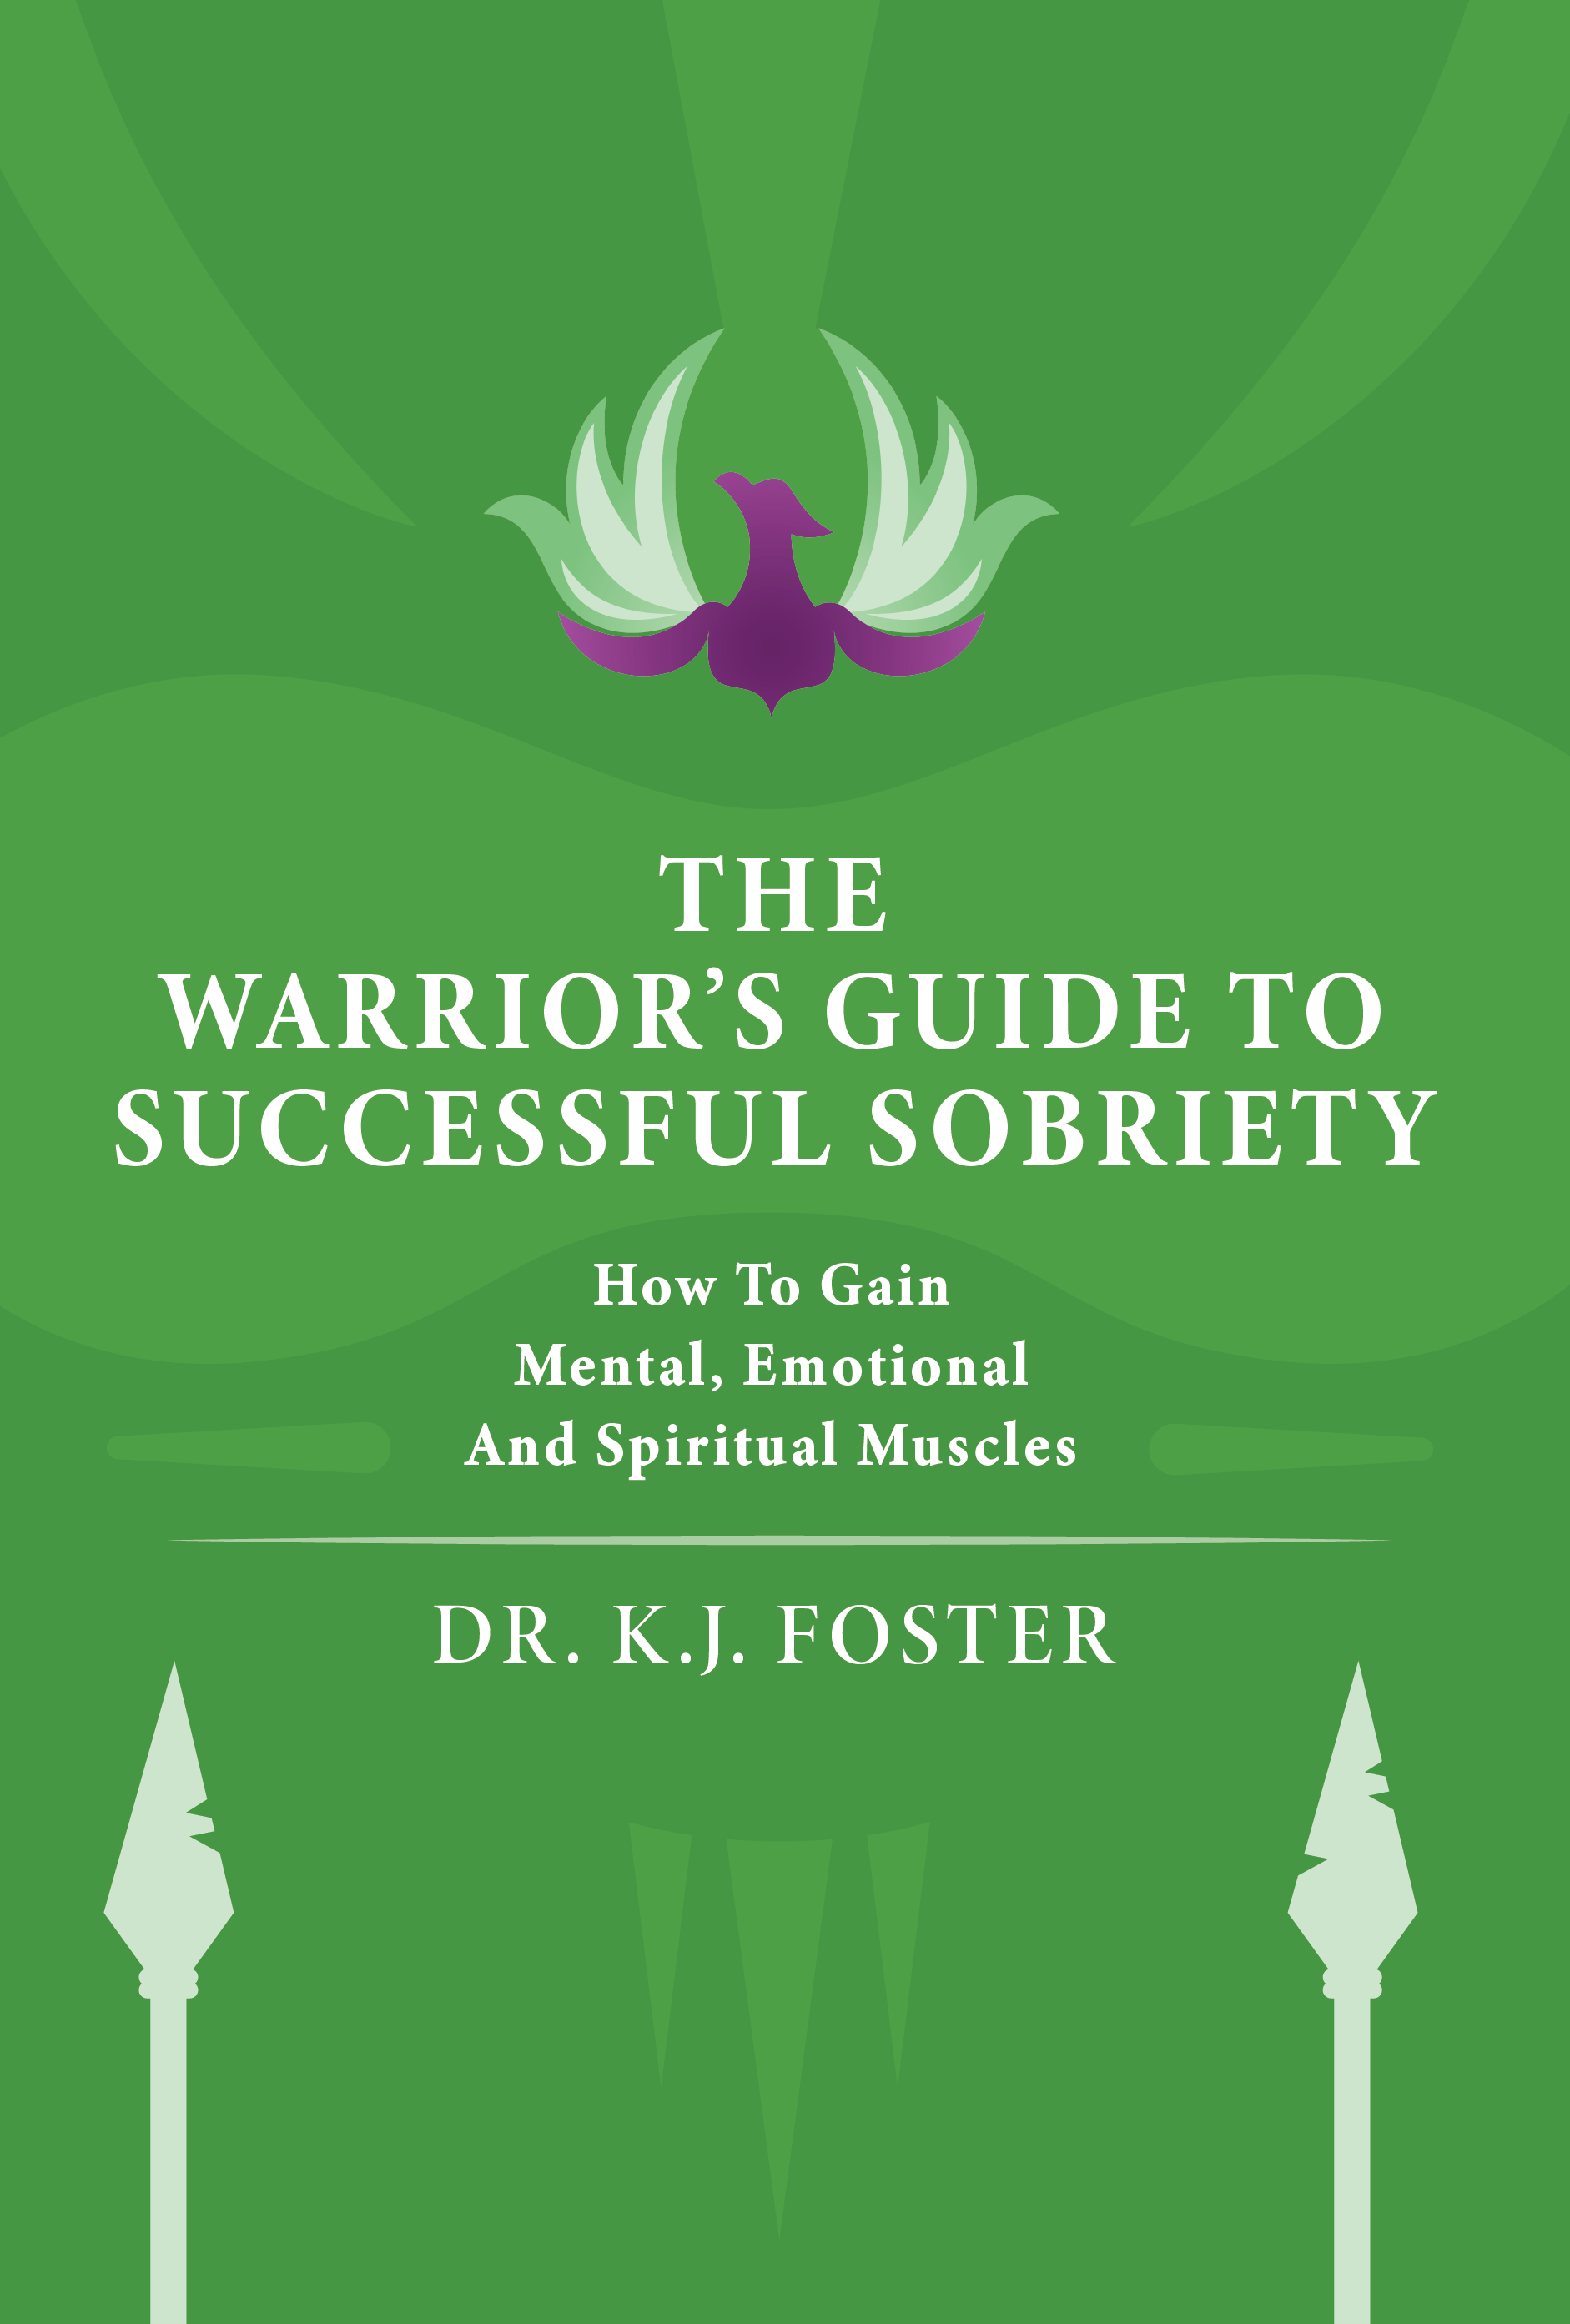 The Warrior’s Guide to Successful Sobriety